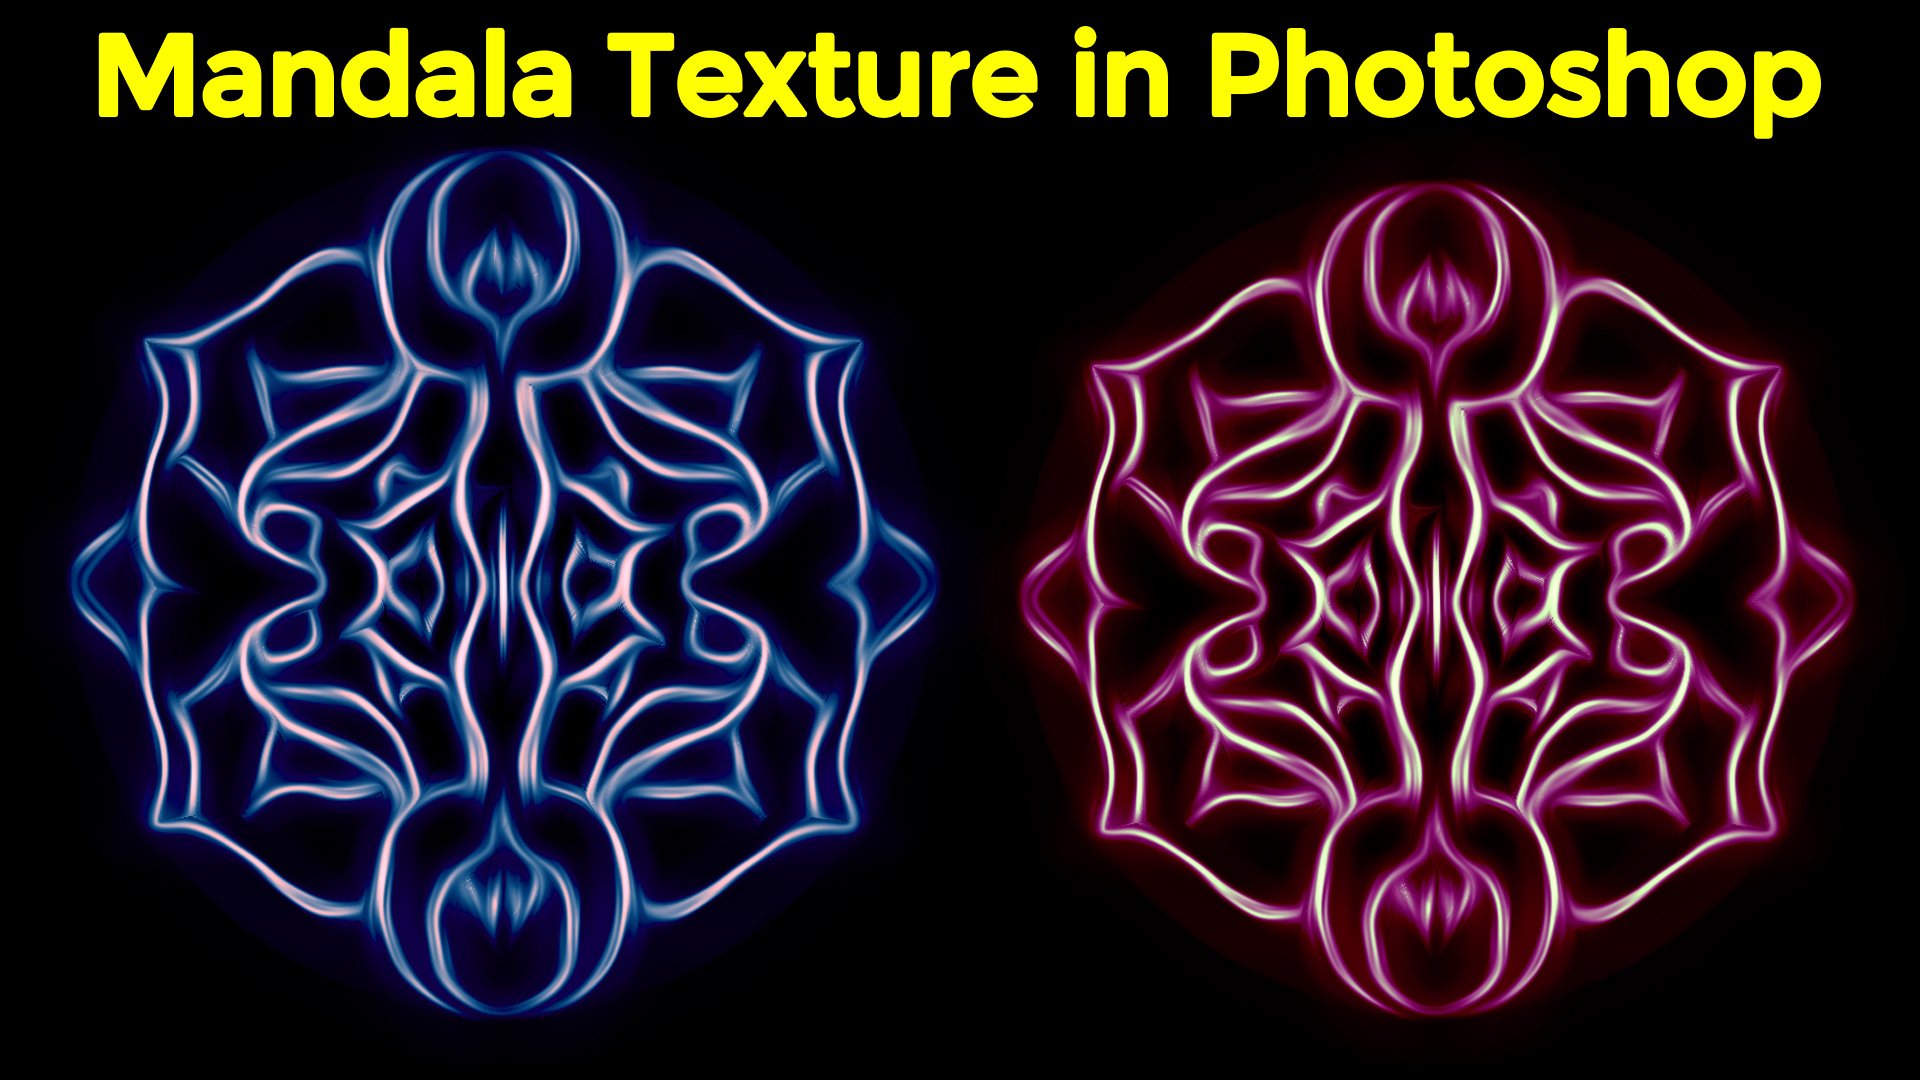 Mandala Texture in Photoshop Tutorial | Download PSD file